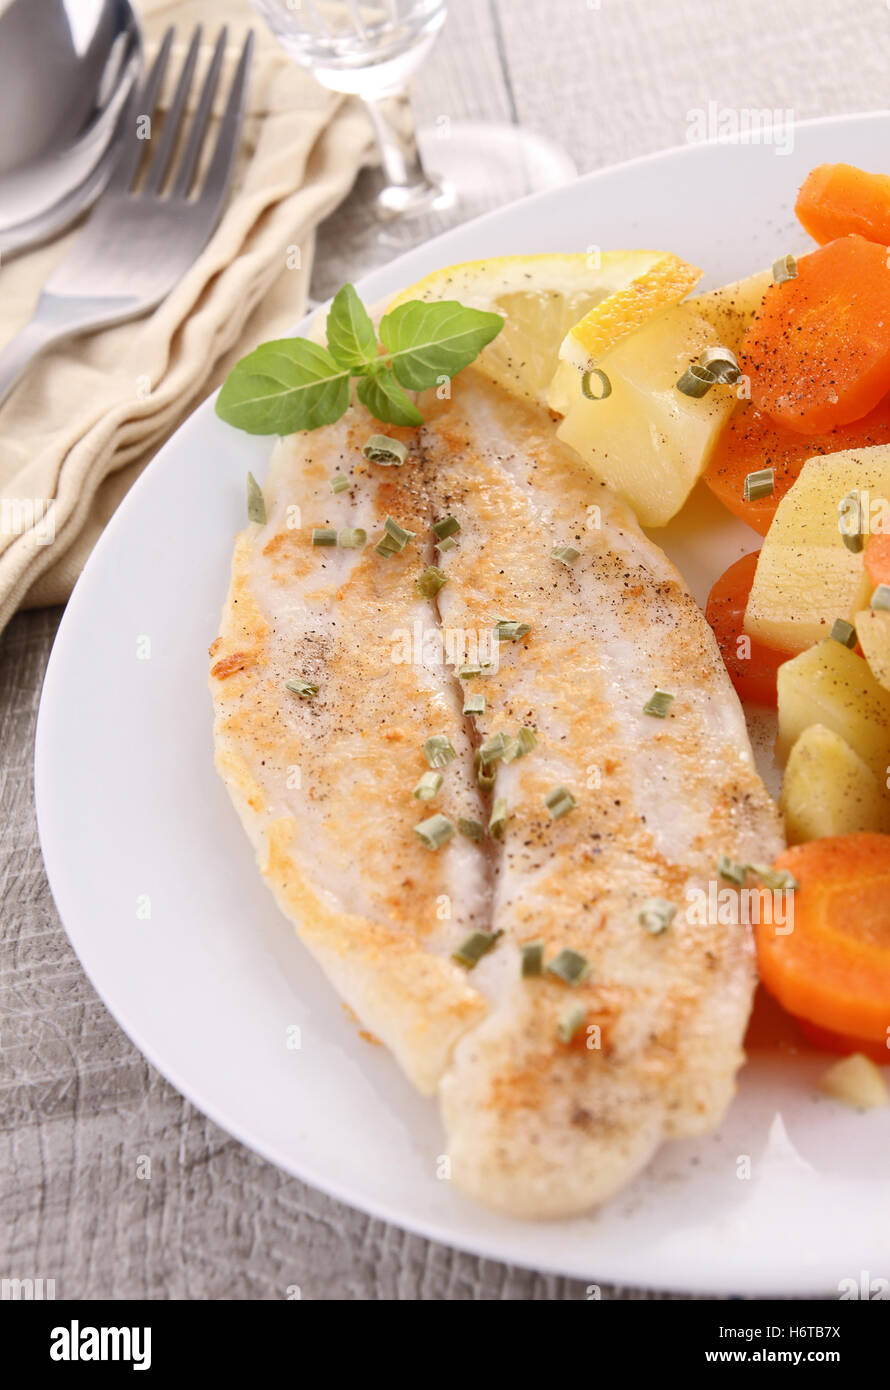 restaurant food aliment gastronomy angle fish vegetable diet trout carrot fork dish meal grilled lunch fillet supper dinner Stock Photo